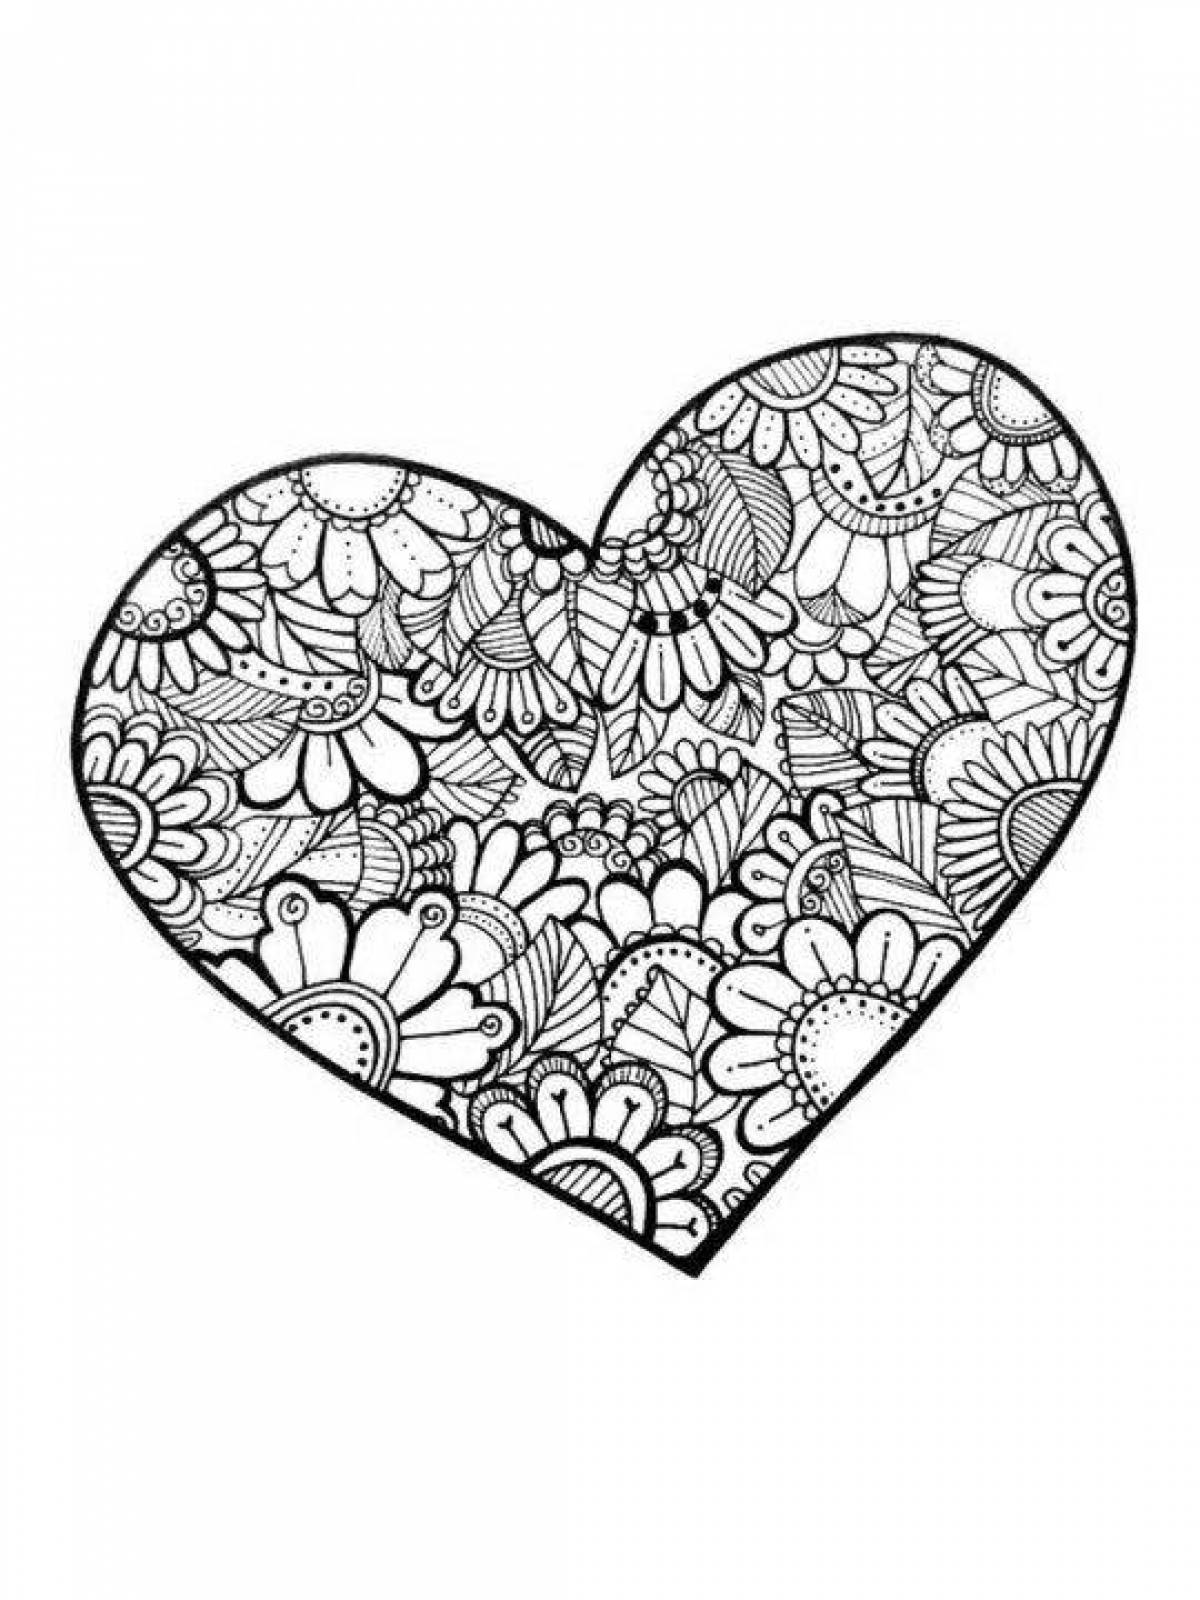 Coloring book charming heart antistress